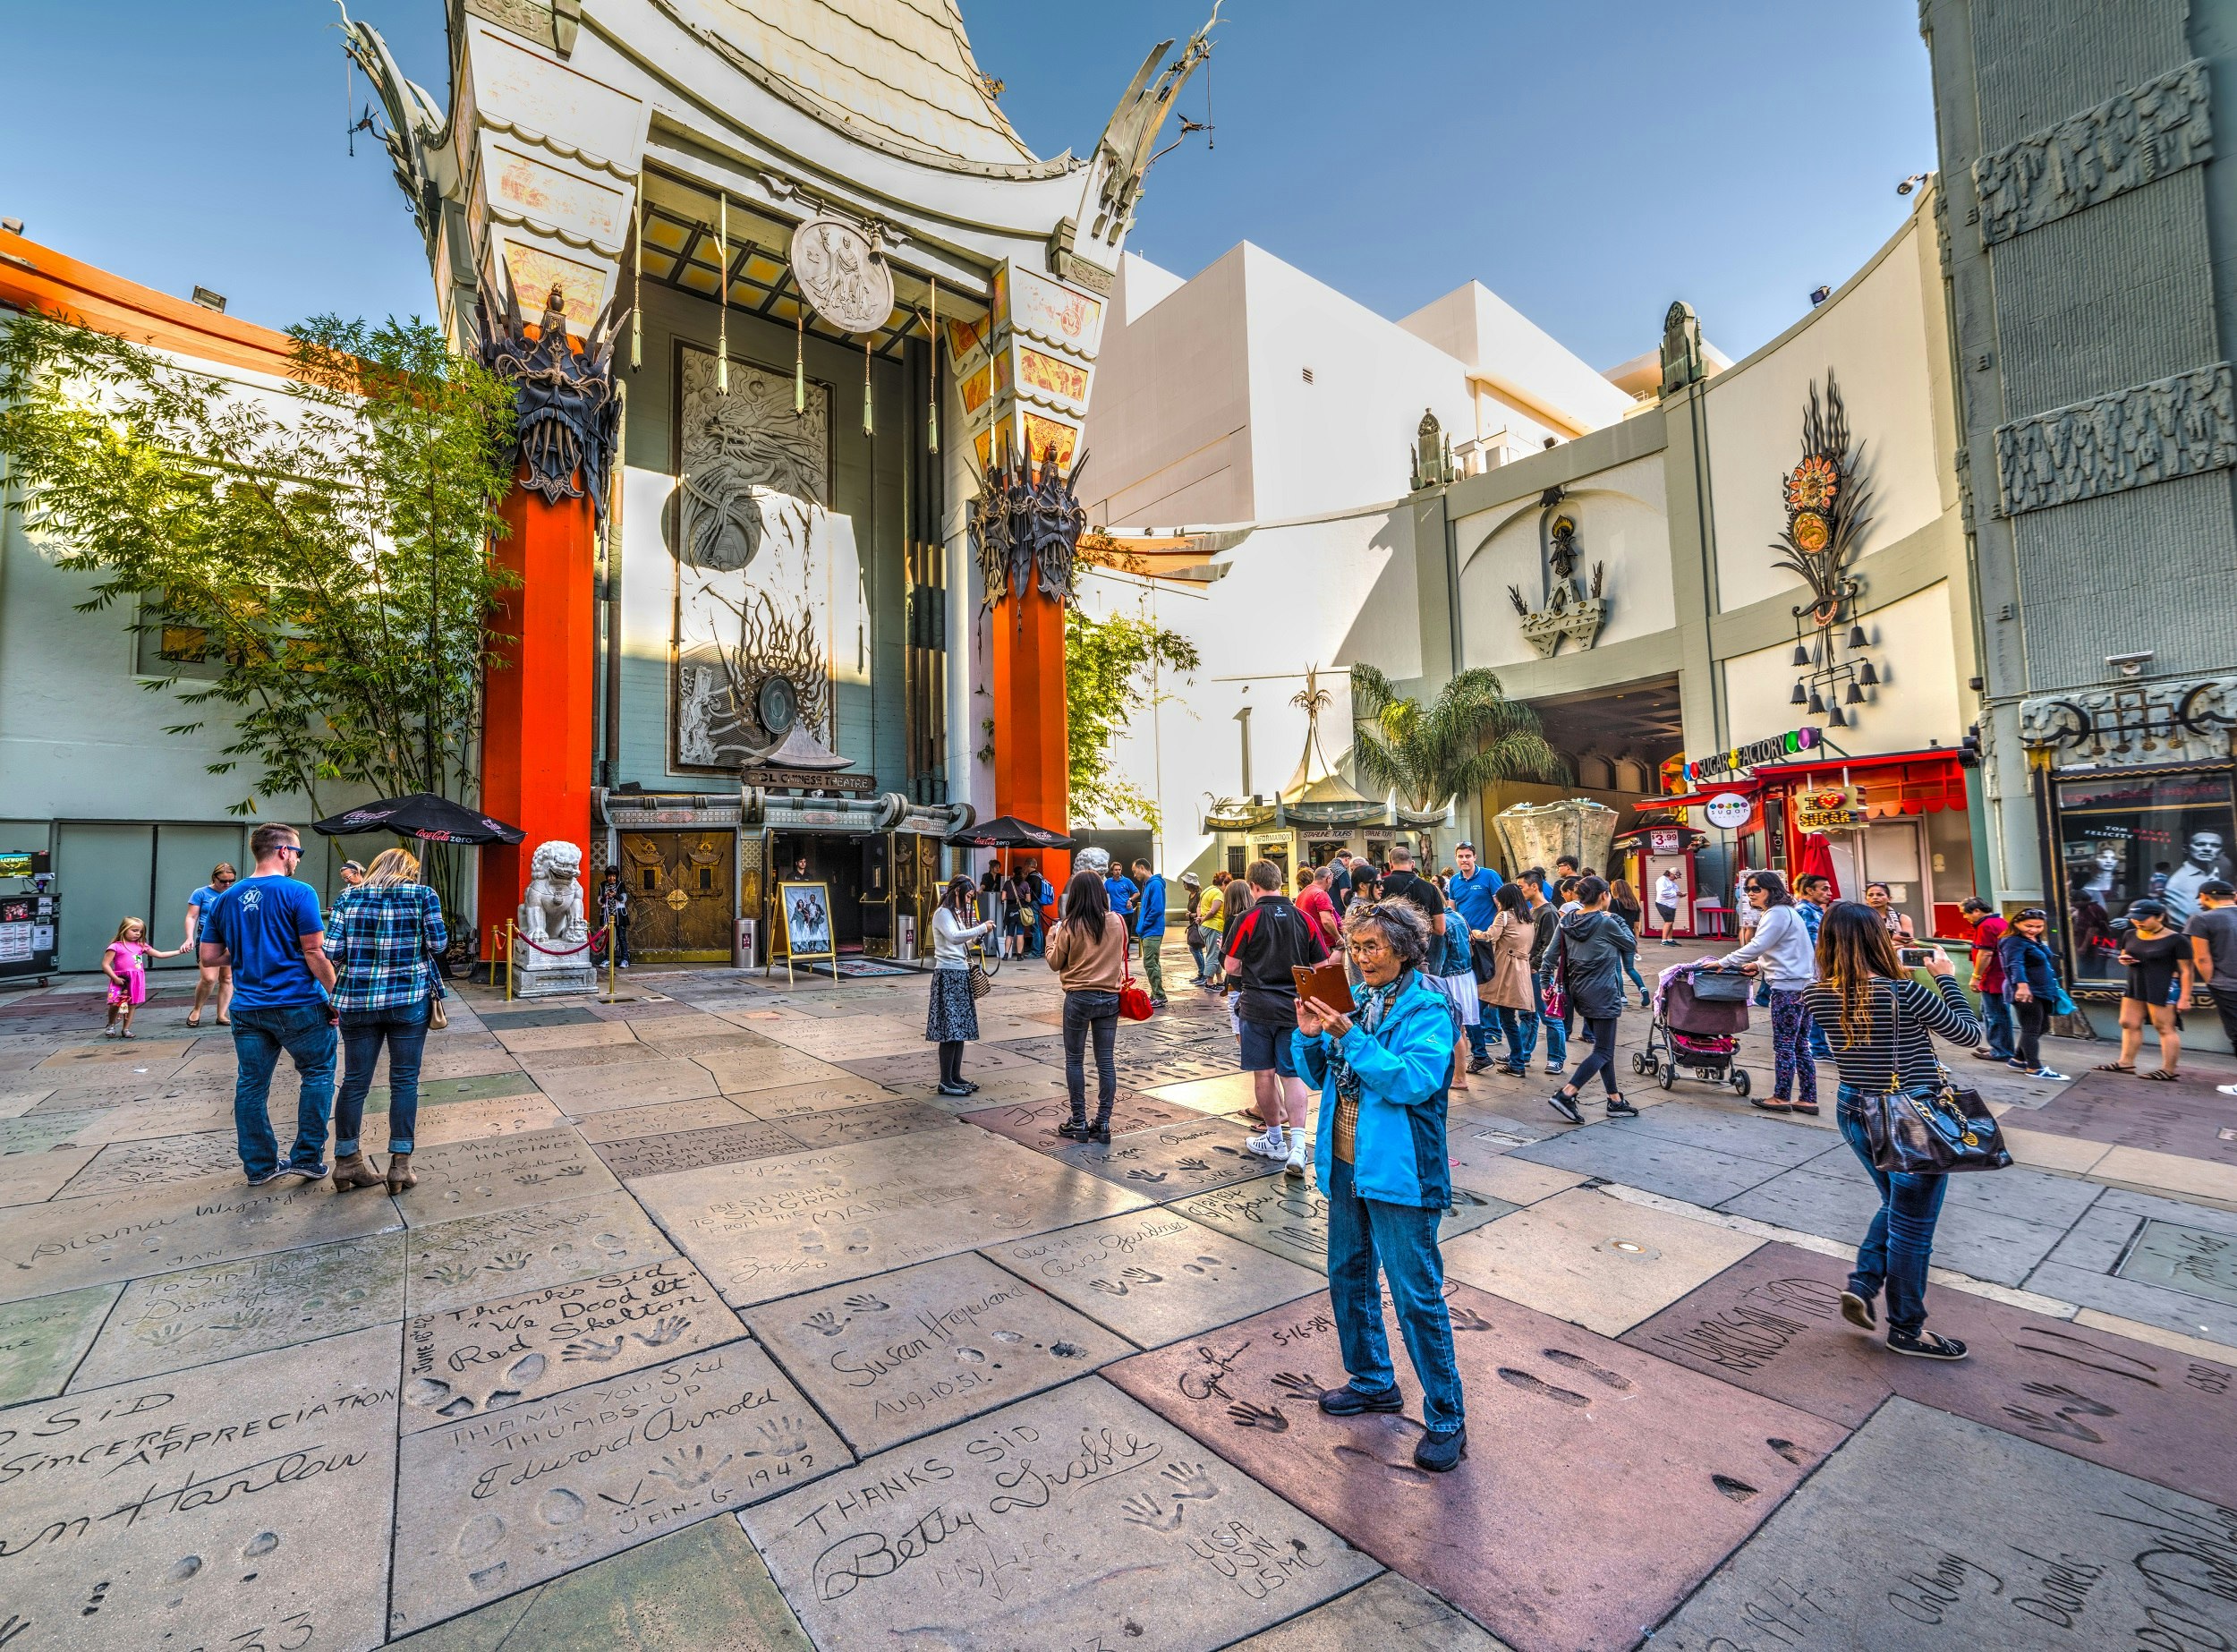 People mingle on the pavement outside the grand TCL Chinese Theater, which resembles a Chinese temple; the pavement is made of slabs of concrete with the handprints and footprints of celebrities.